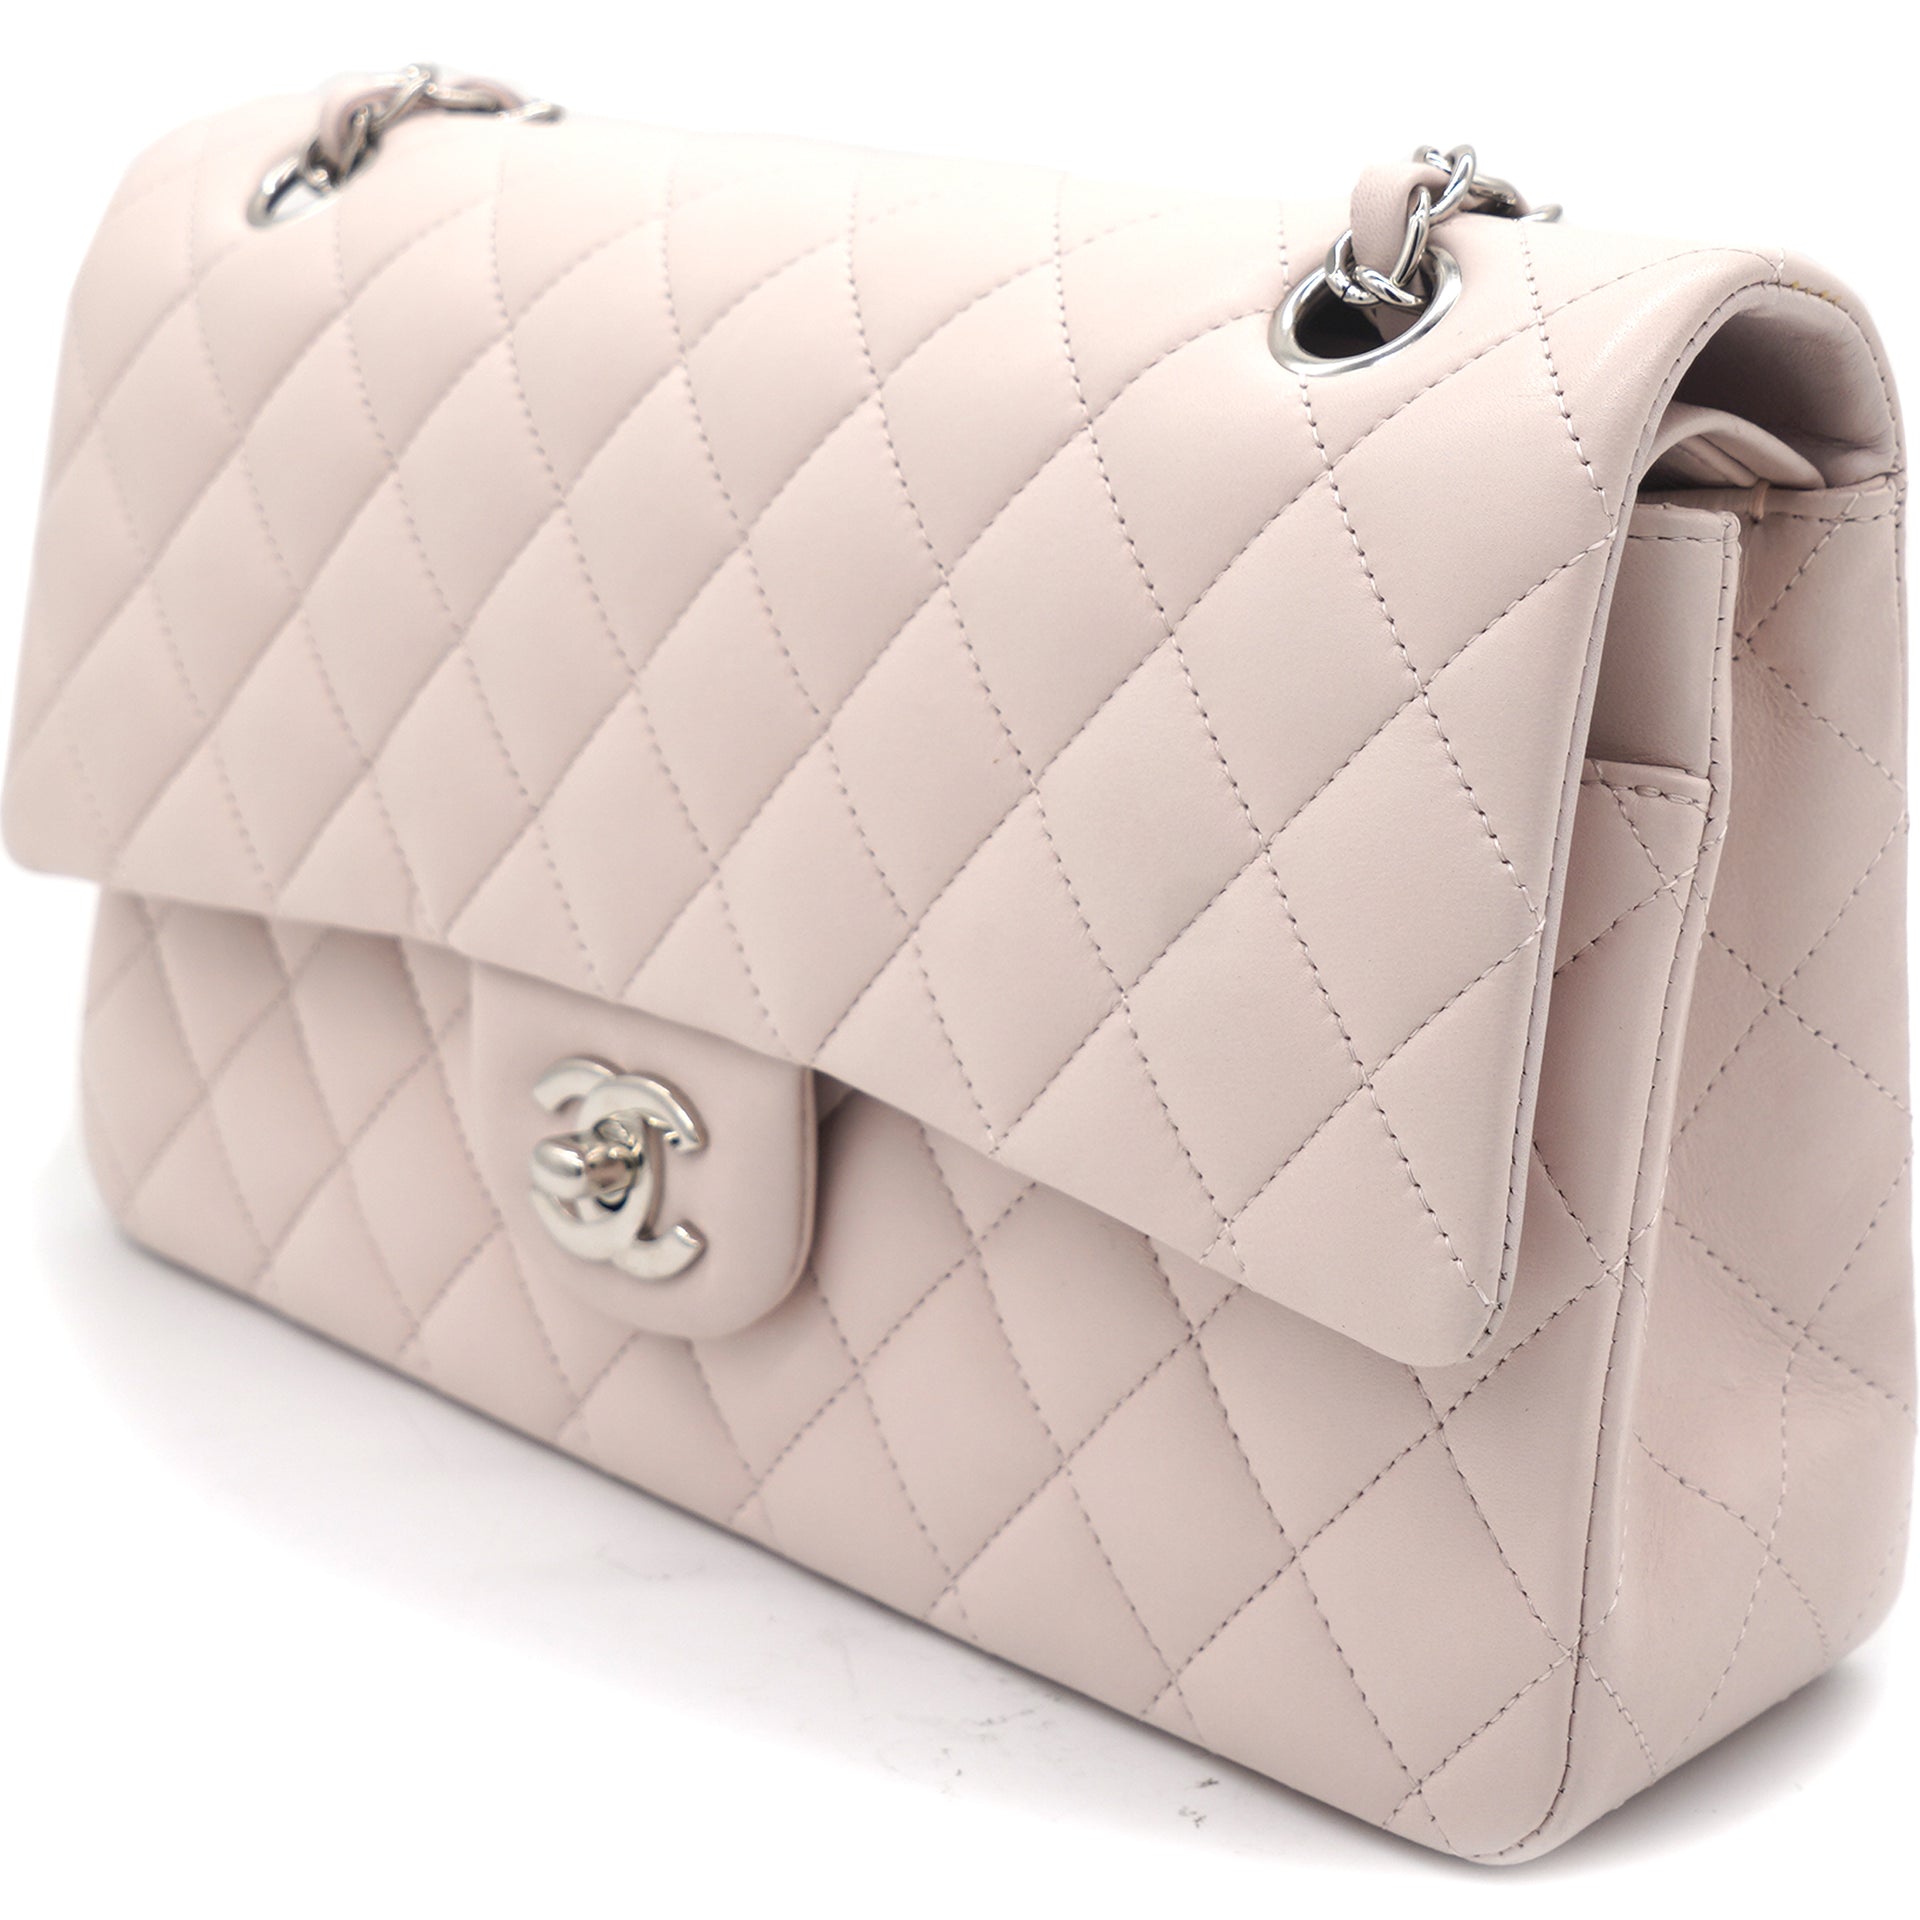 Pink Quilted Caviar Medium Classic Double Flap Bag Silver